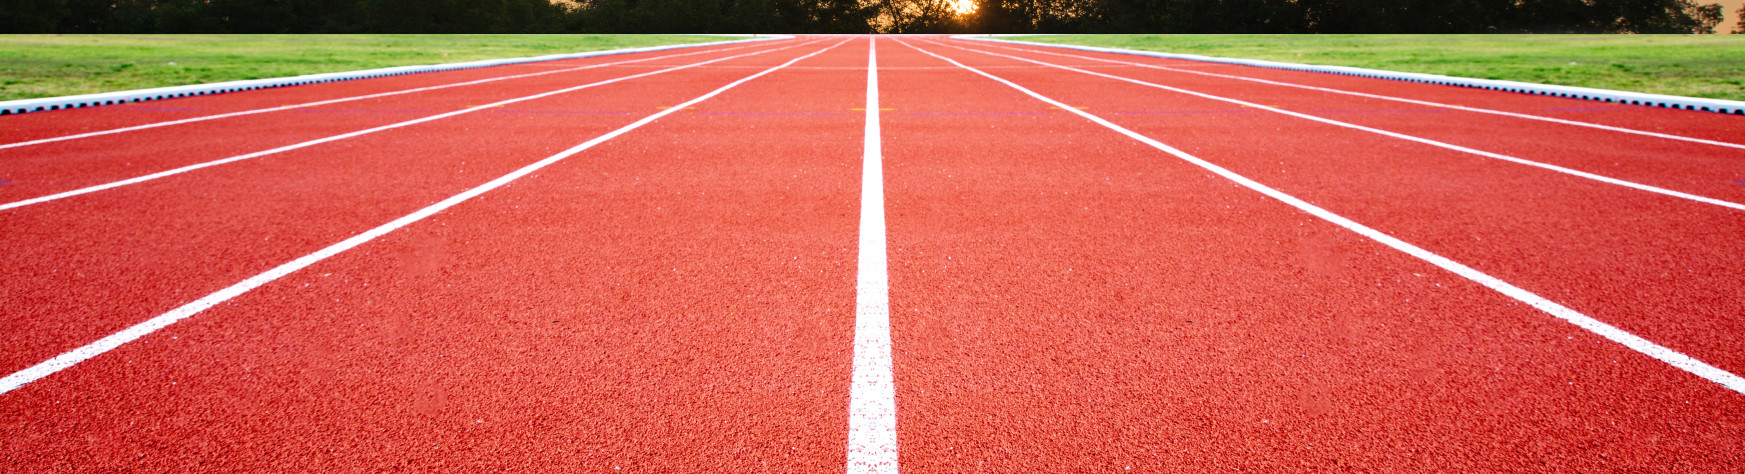 A picture of a running track with a sunset